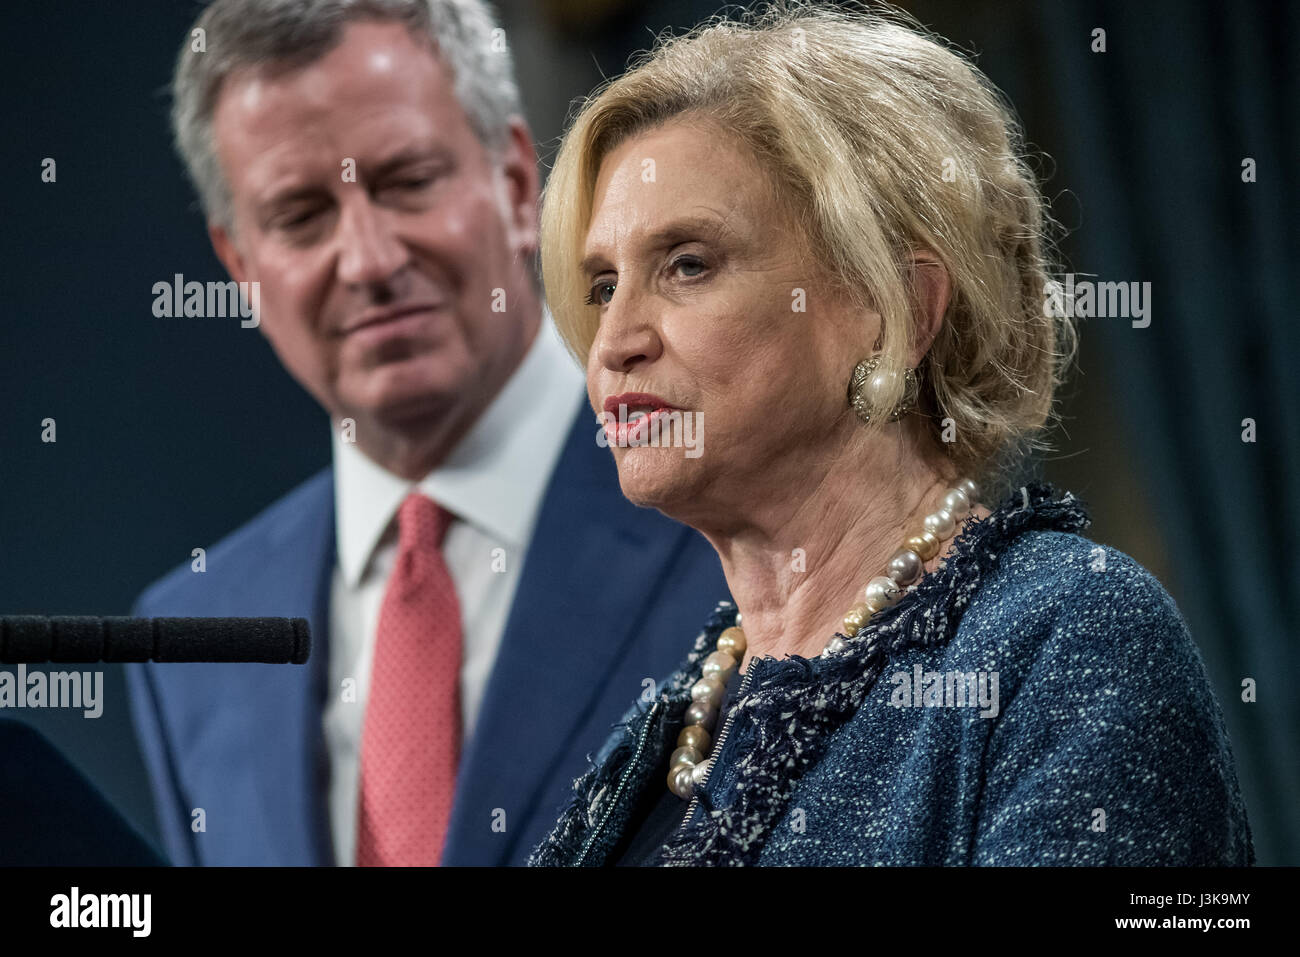 New York, United States. 05th May, 2017. U.S. Representative Caroline Maloney (D - NY 12th District) is seen during the press conference. New York City Mayor Bill de Blasio, joined by U.S. Congress members representing districts in New York City, held a press conference in the Blue Room at City Hall to announce a federal budget deal allowing for $68 million of reimbursements by the federal government for the City's expenses in protecting Trump Tower and the Presidential First Family. Credit: Albin Lohr-Jones/Pacific Press/Alamy Live News Stock Photo